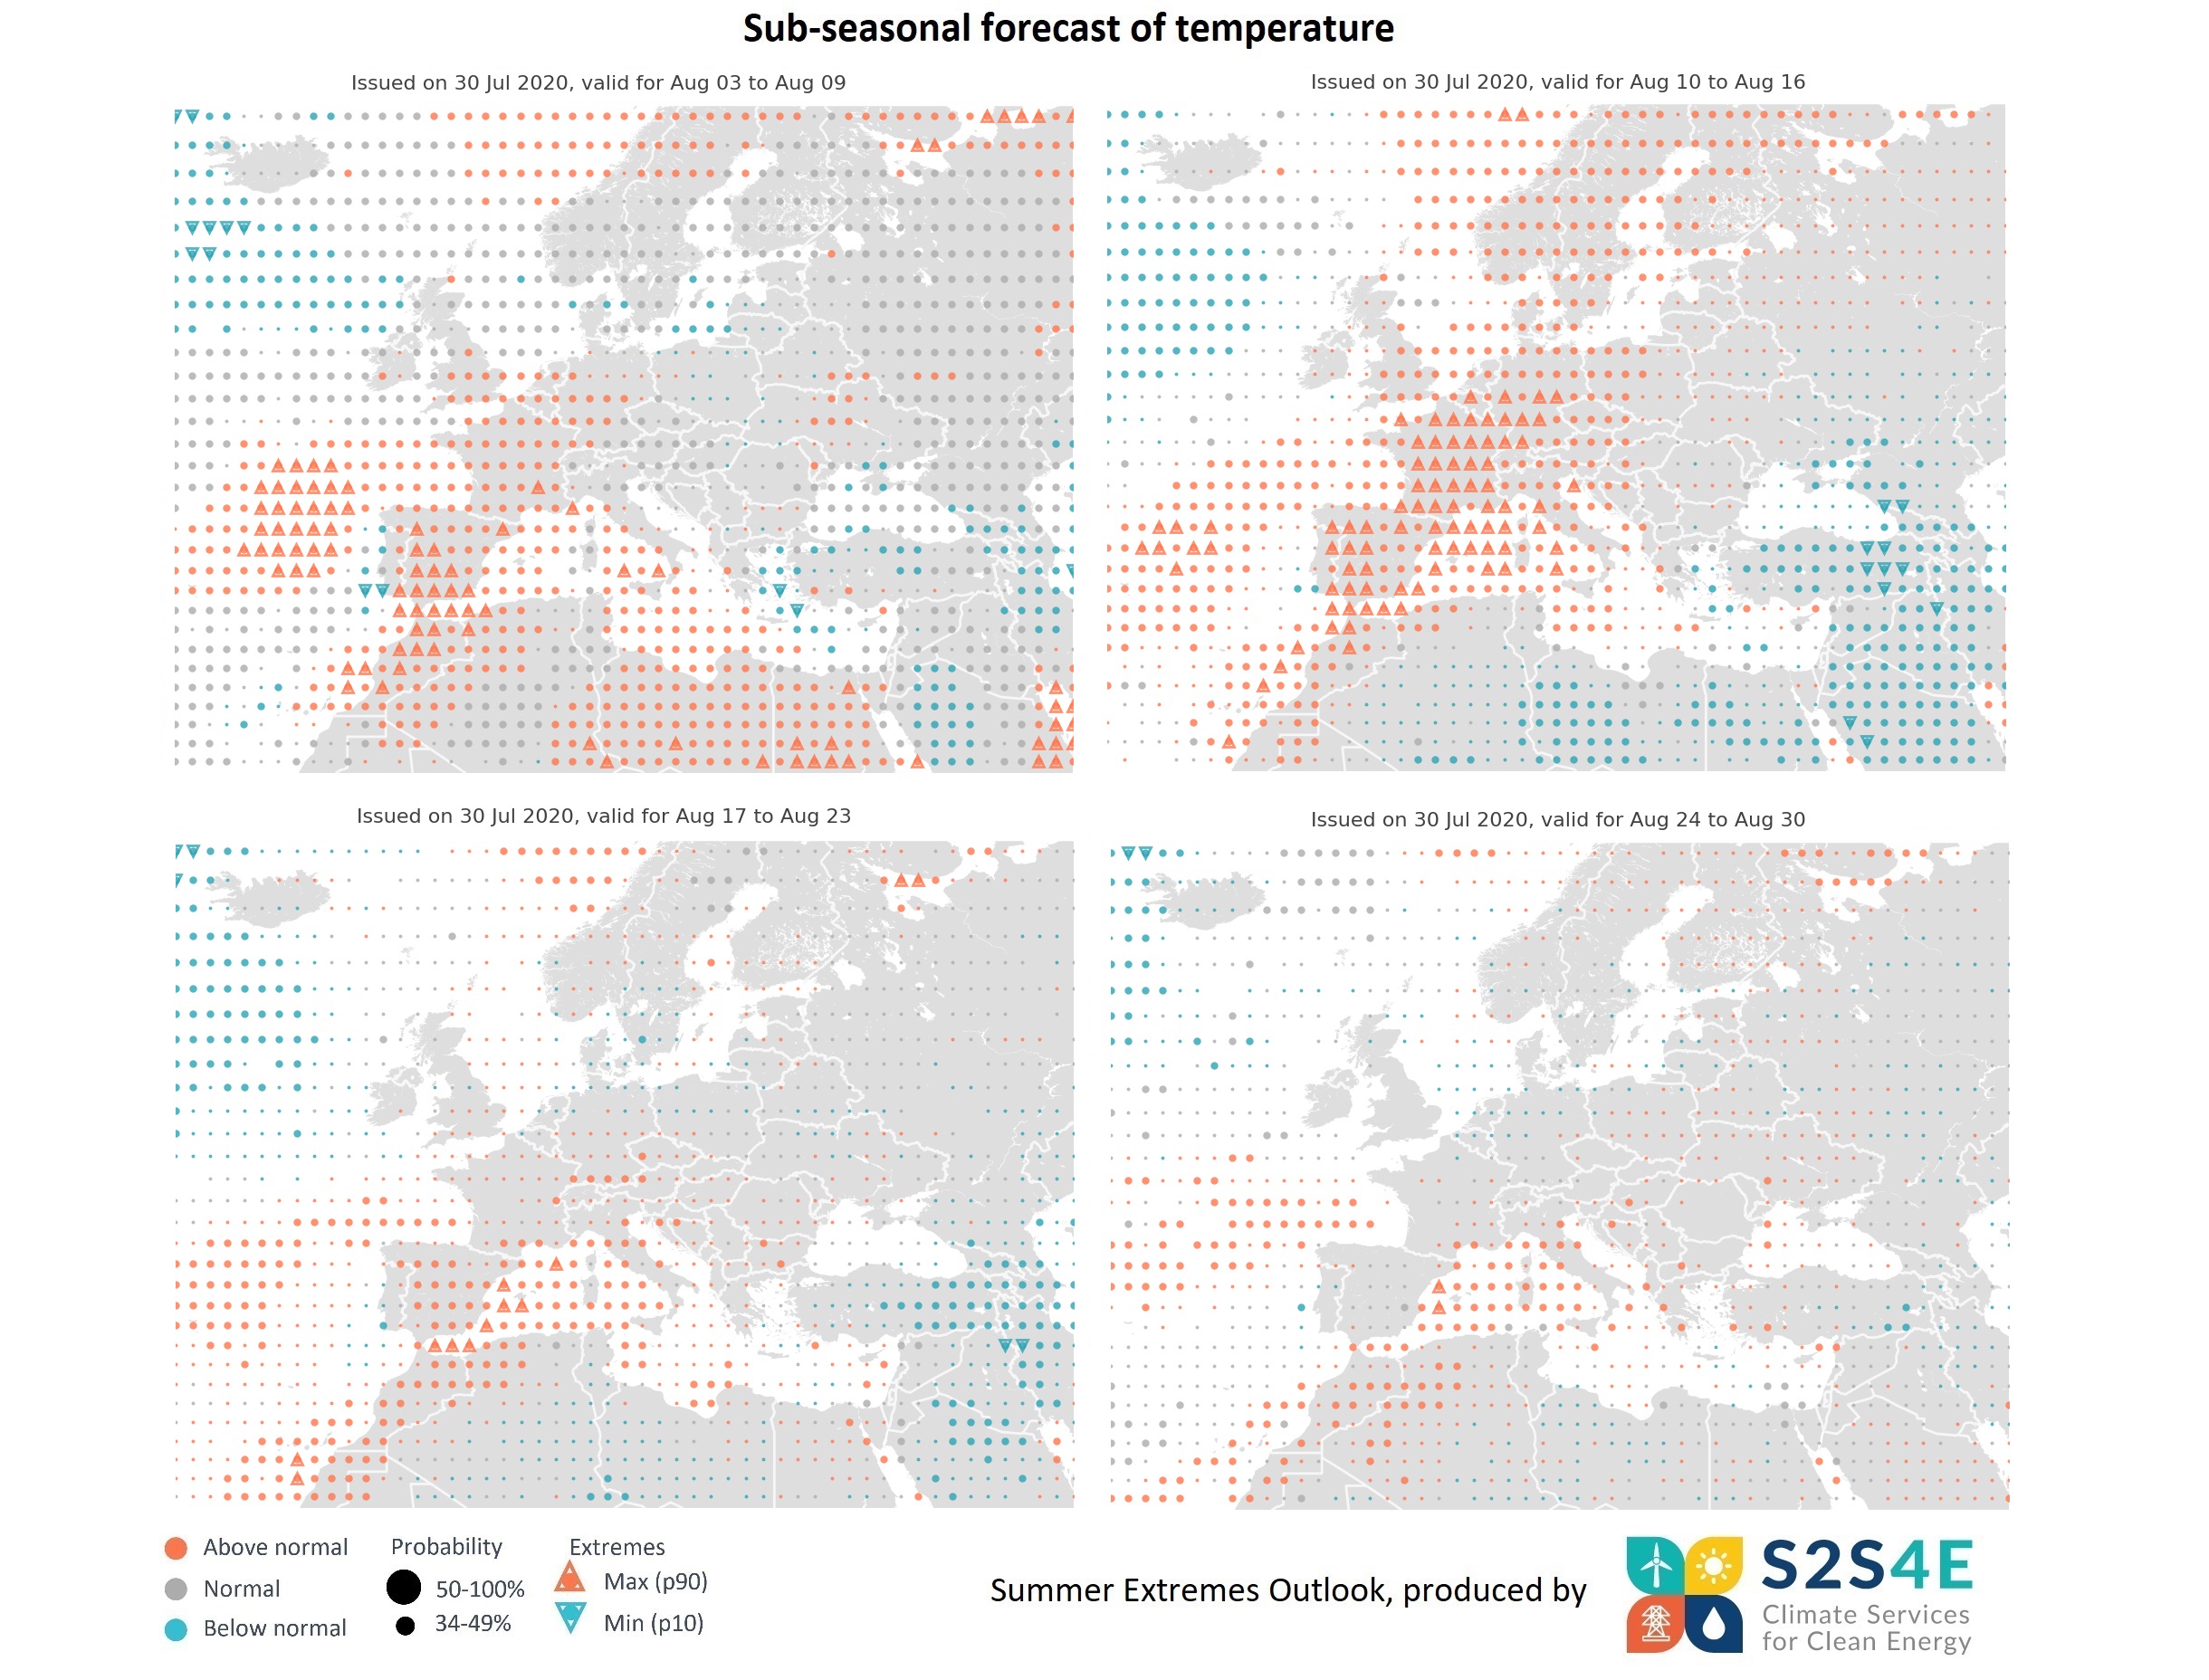 Summer extremes forecast for 31 July 2020